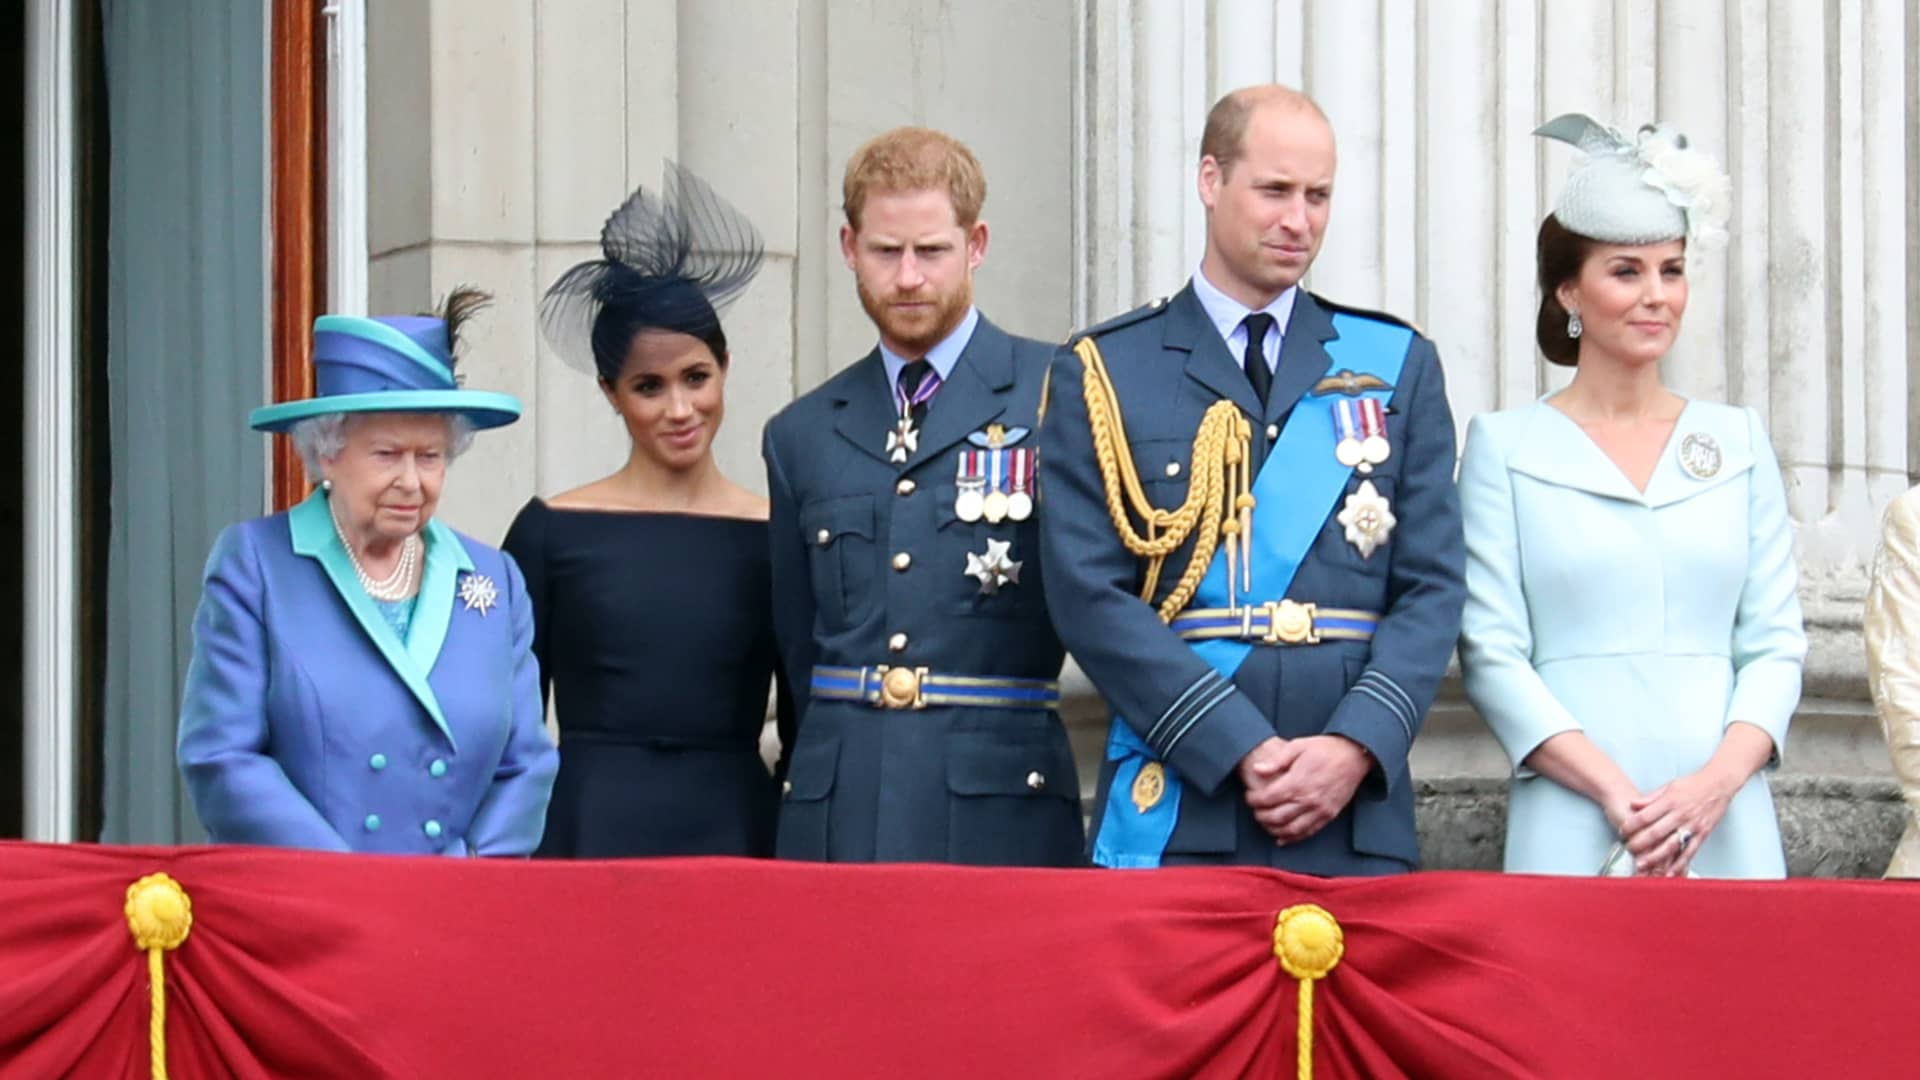 (L-R) Queen Elizabeth II, Meghan, Duchess of Sussex, Prince Harry, Duke of Sussex, Prince William, Duke of Cambridge and Catherine, Duchess of Cambridge watch the RAF flypast on the balcony of Buckingham Palace, as members of the Royal Family attend events to mark the centenary of the RAF on July 10, 2018 in London, England.